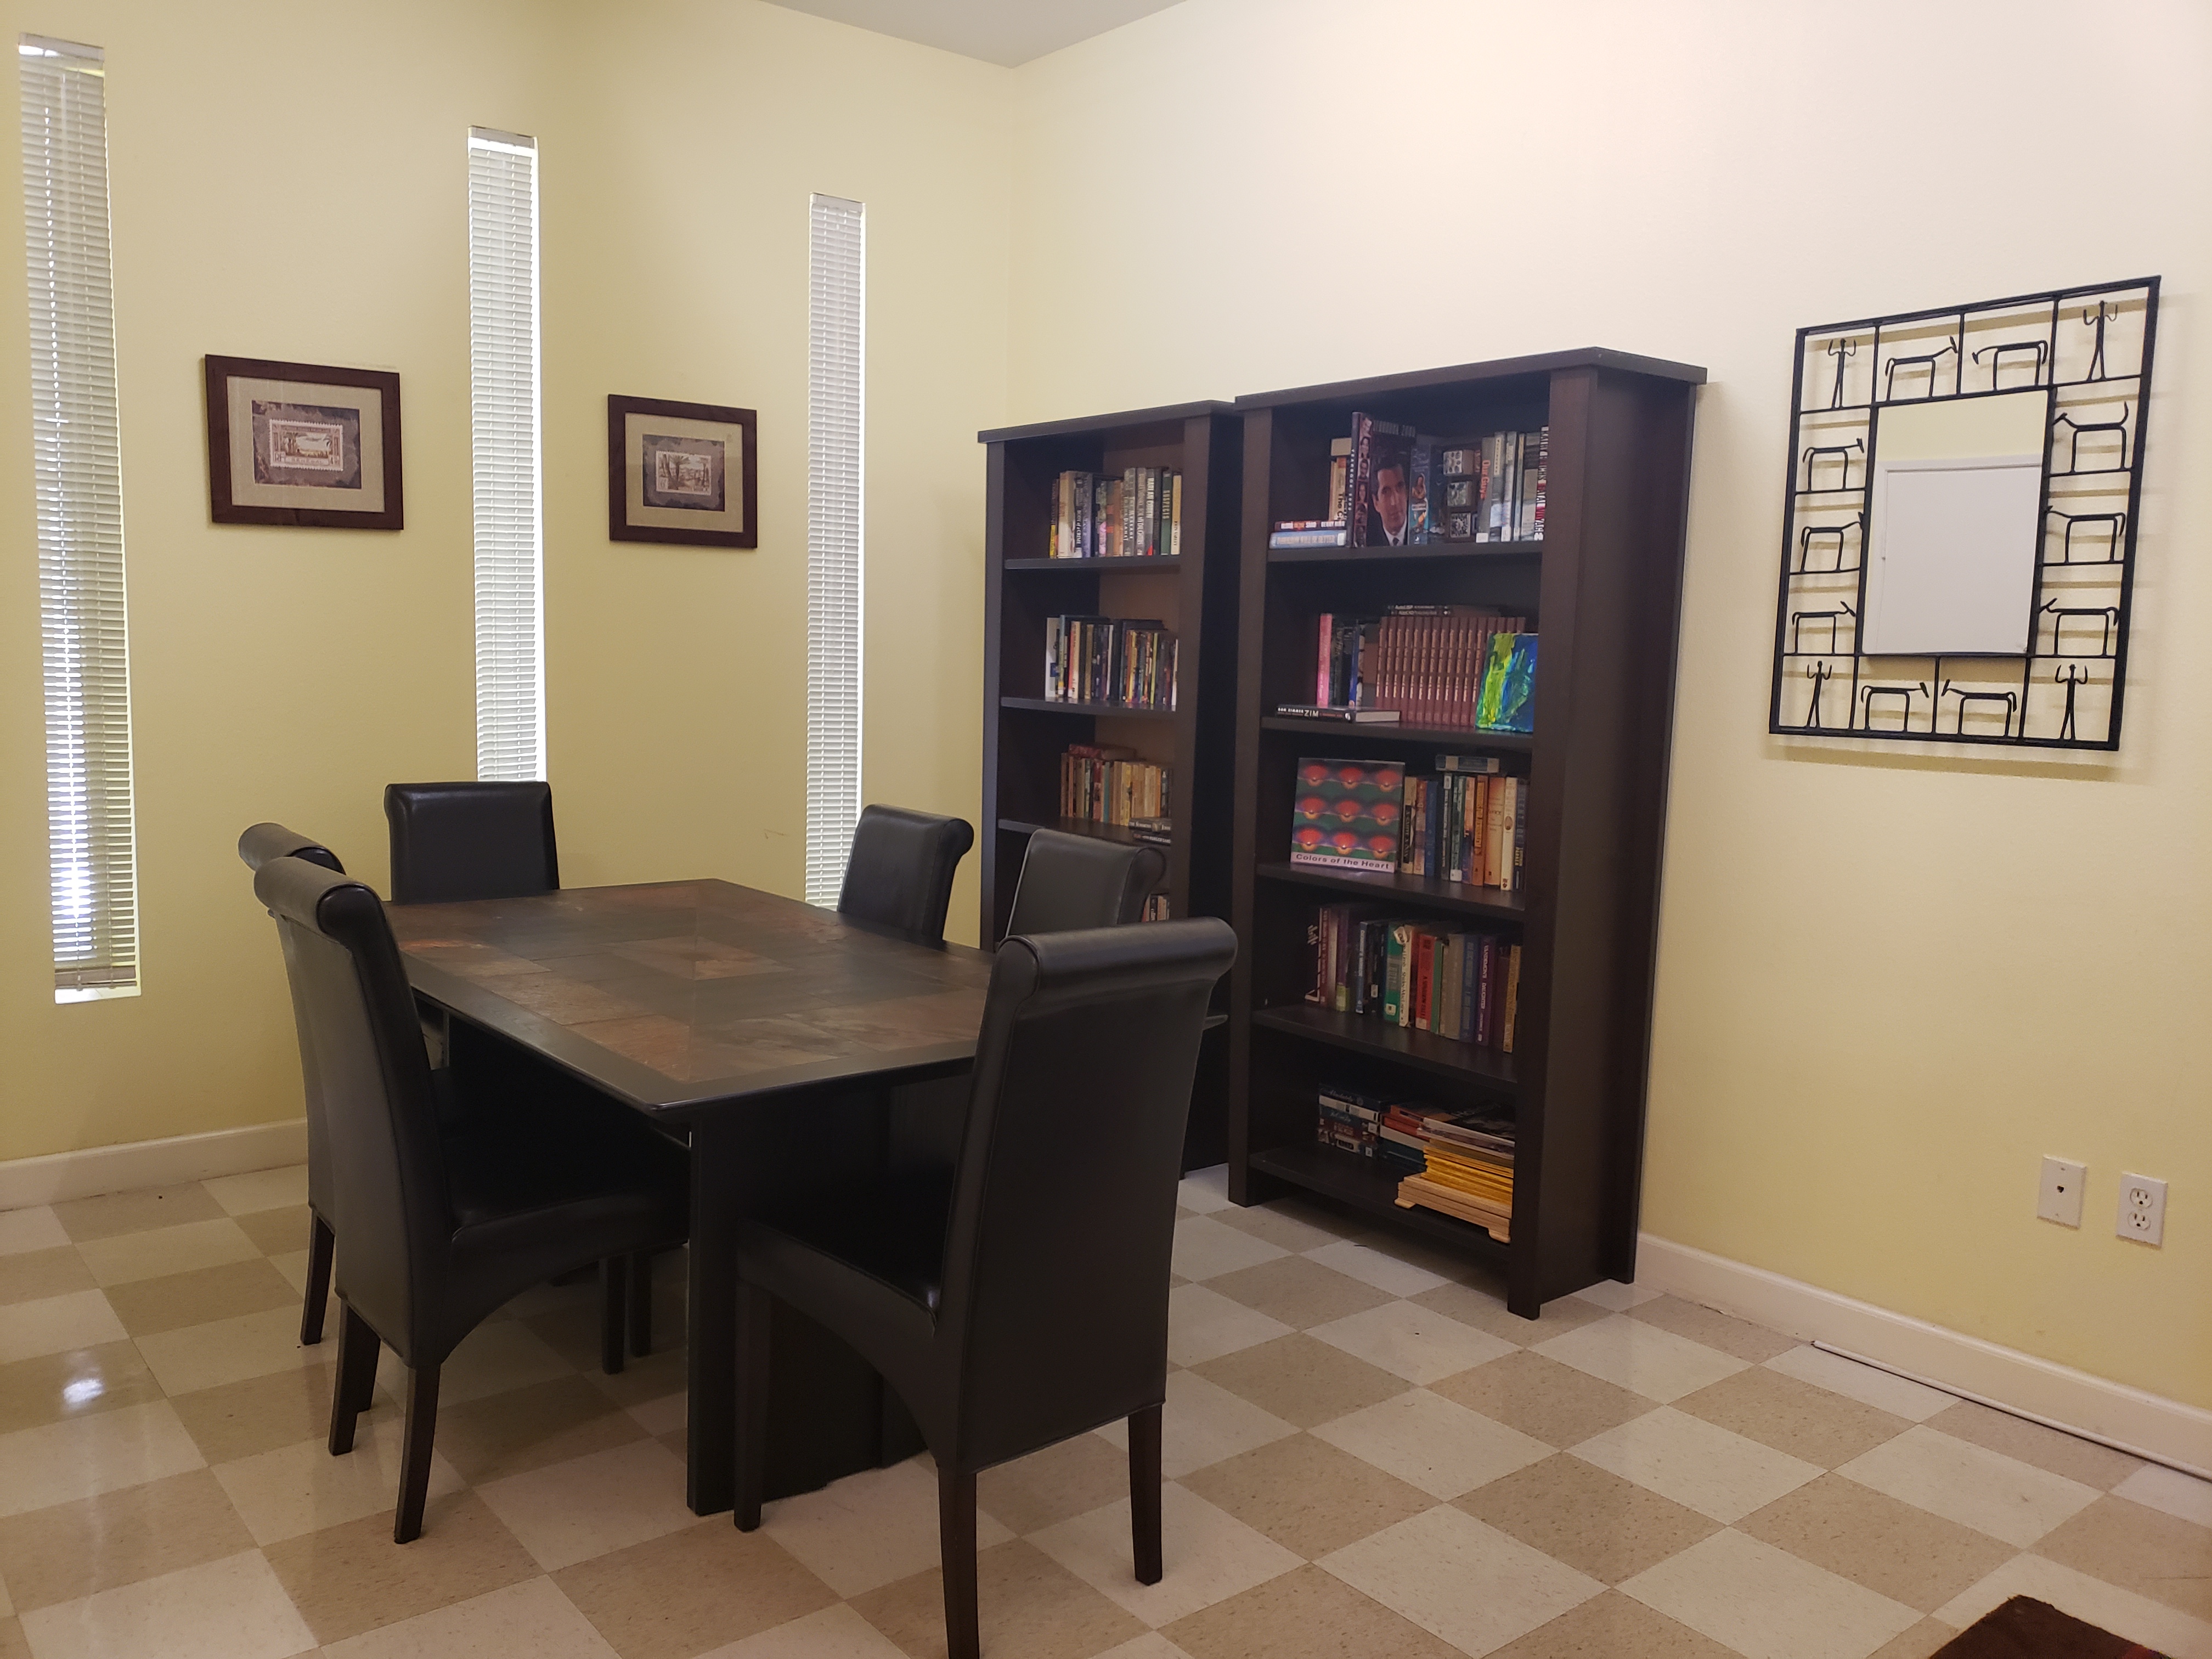 Right side of a room, a brown square table with six brown leather chairs, two brown tall shelves full of books, three decorative frames on the wall, windows with horizontal blinds.